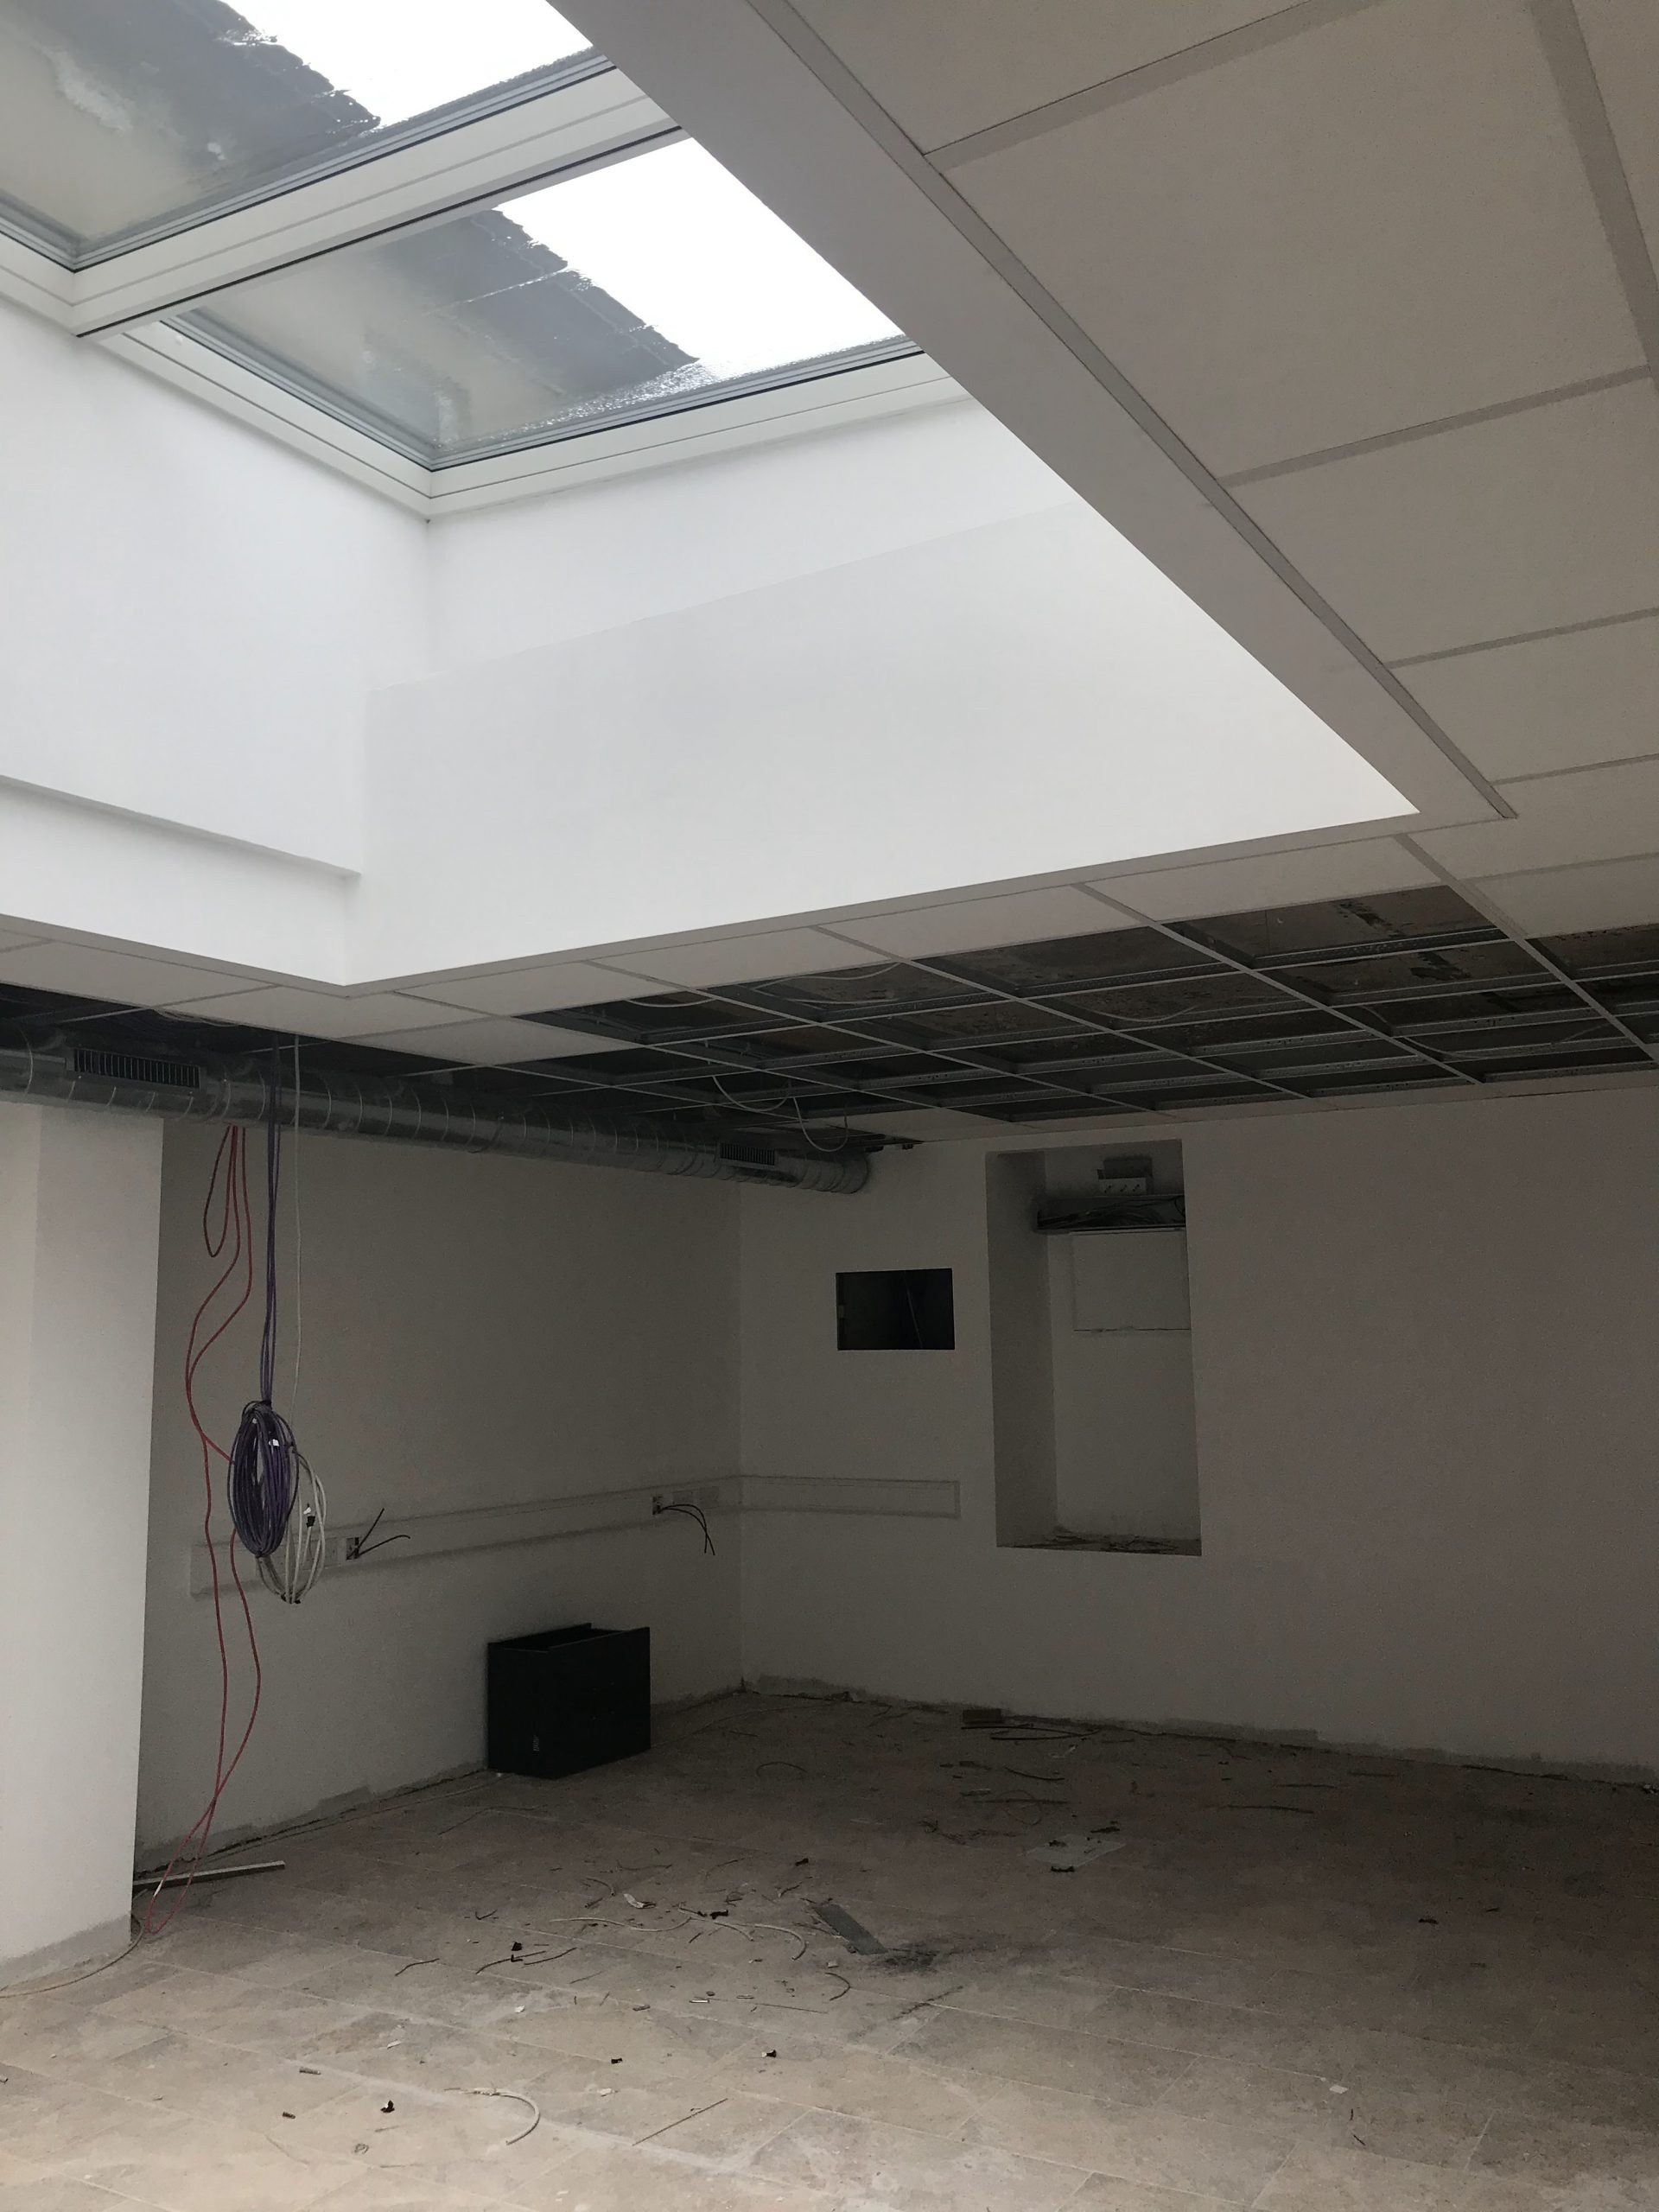 New Skylight in meeting space